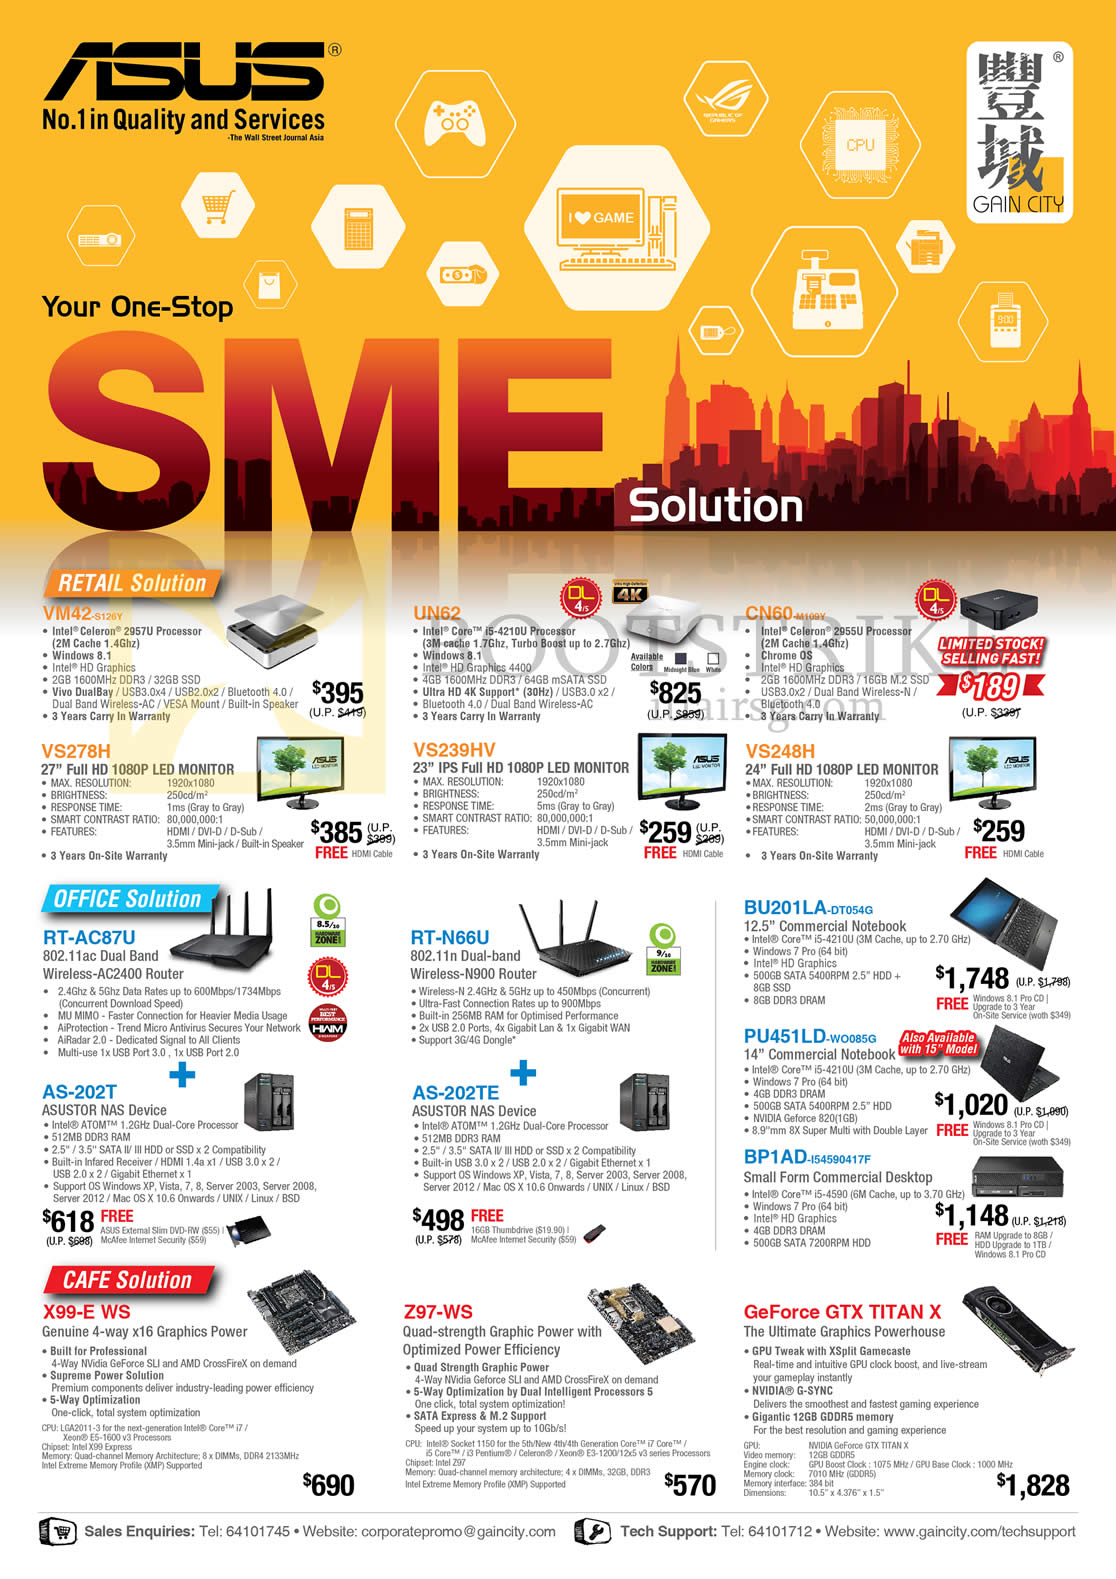 COMEX 2015 price list image brochure of ASUS SME Networking Notebooks Cafe Montiors, VM42-S126Y, UN62, CN60-M109Y, VS248H VS239HV VS278H, RT-AC87U RT-N66U, S-202TE, AS-202T, X99-E WS, Z97-WS, GeForce